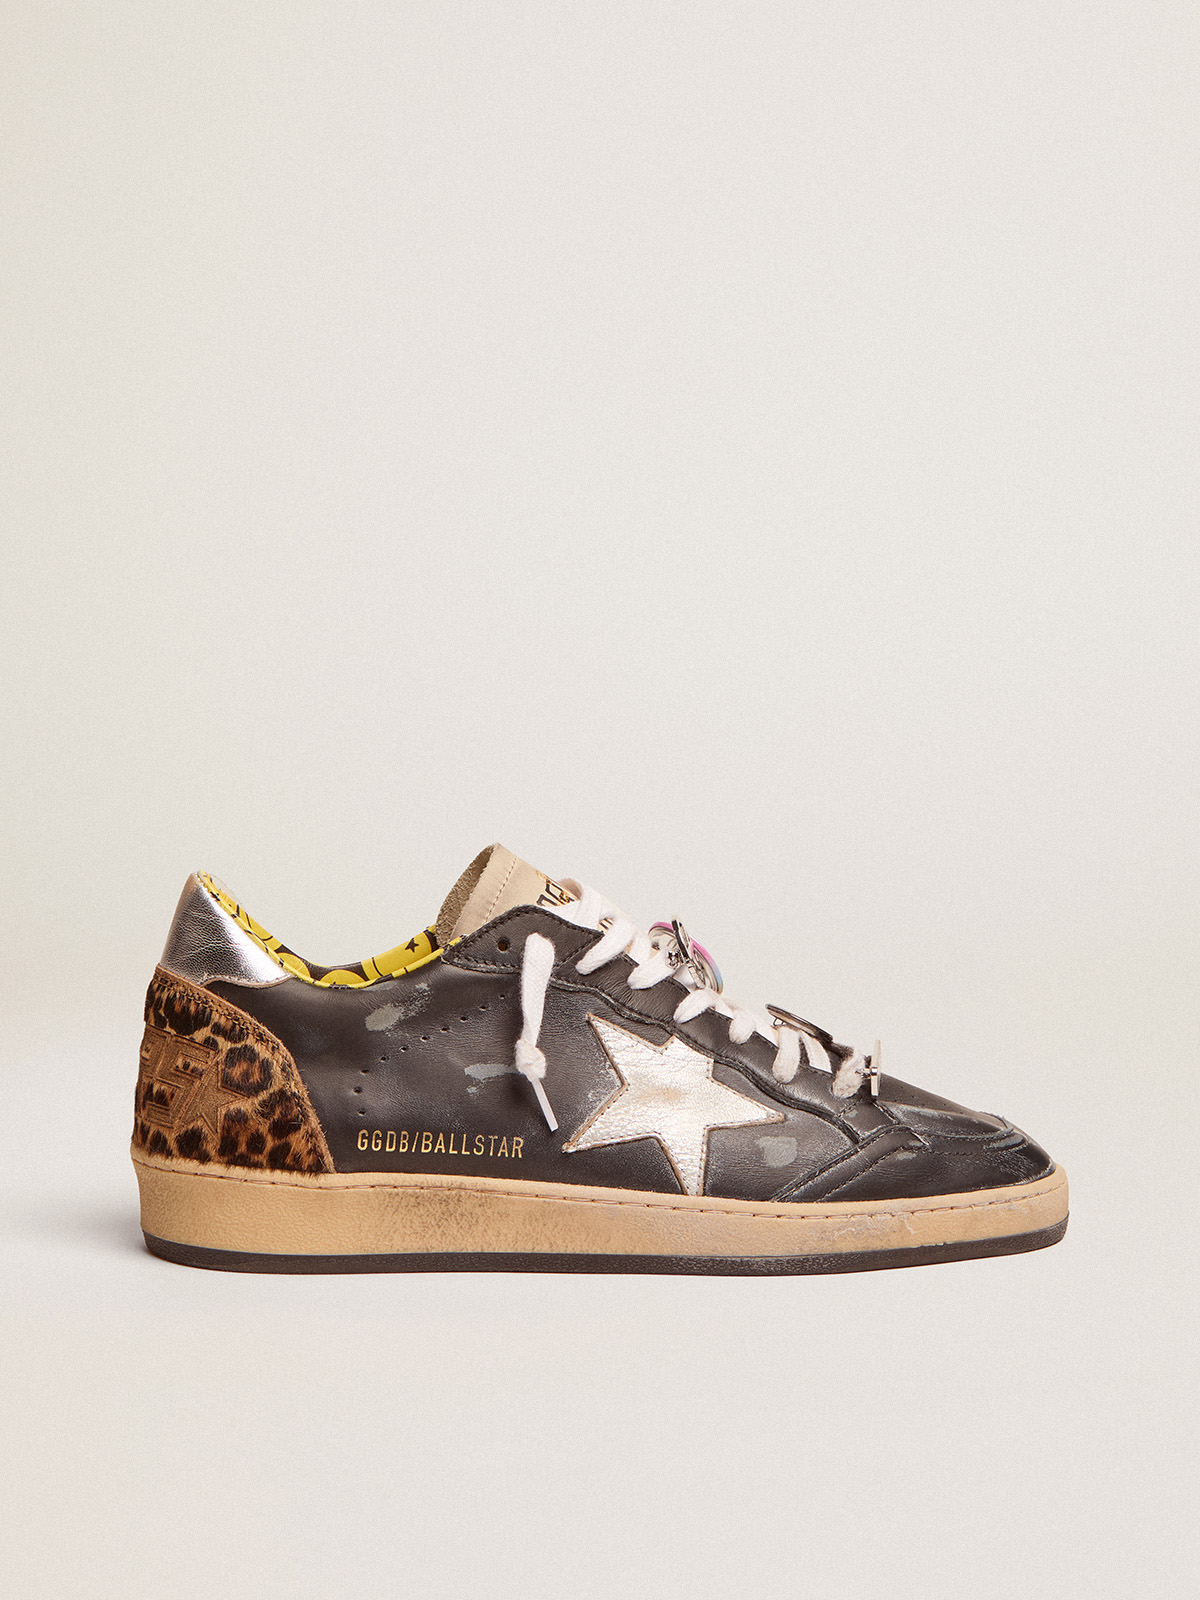 Ball Star sneakers in black leather with silver laminated leather star |  Golden Goose